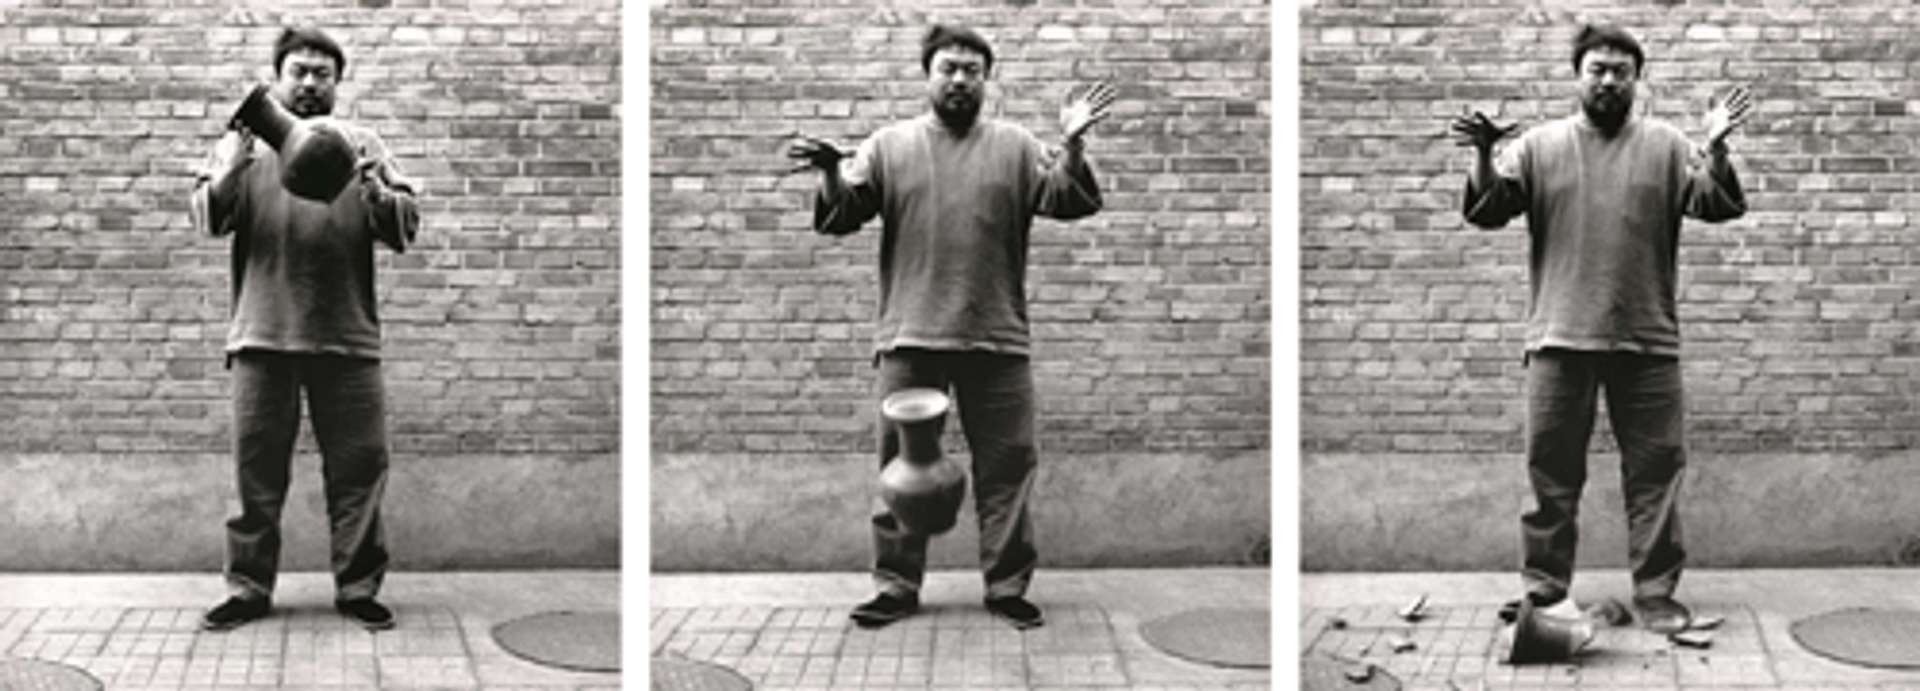 Three black and white photographs capturing artist Ai WeiWei standing against a brick wall. In each photo, he holds a Chinese urn, subsequently dropping it, resulting in the urn shattering on the ground.